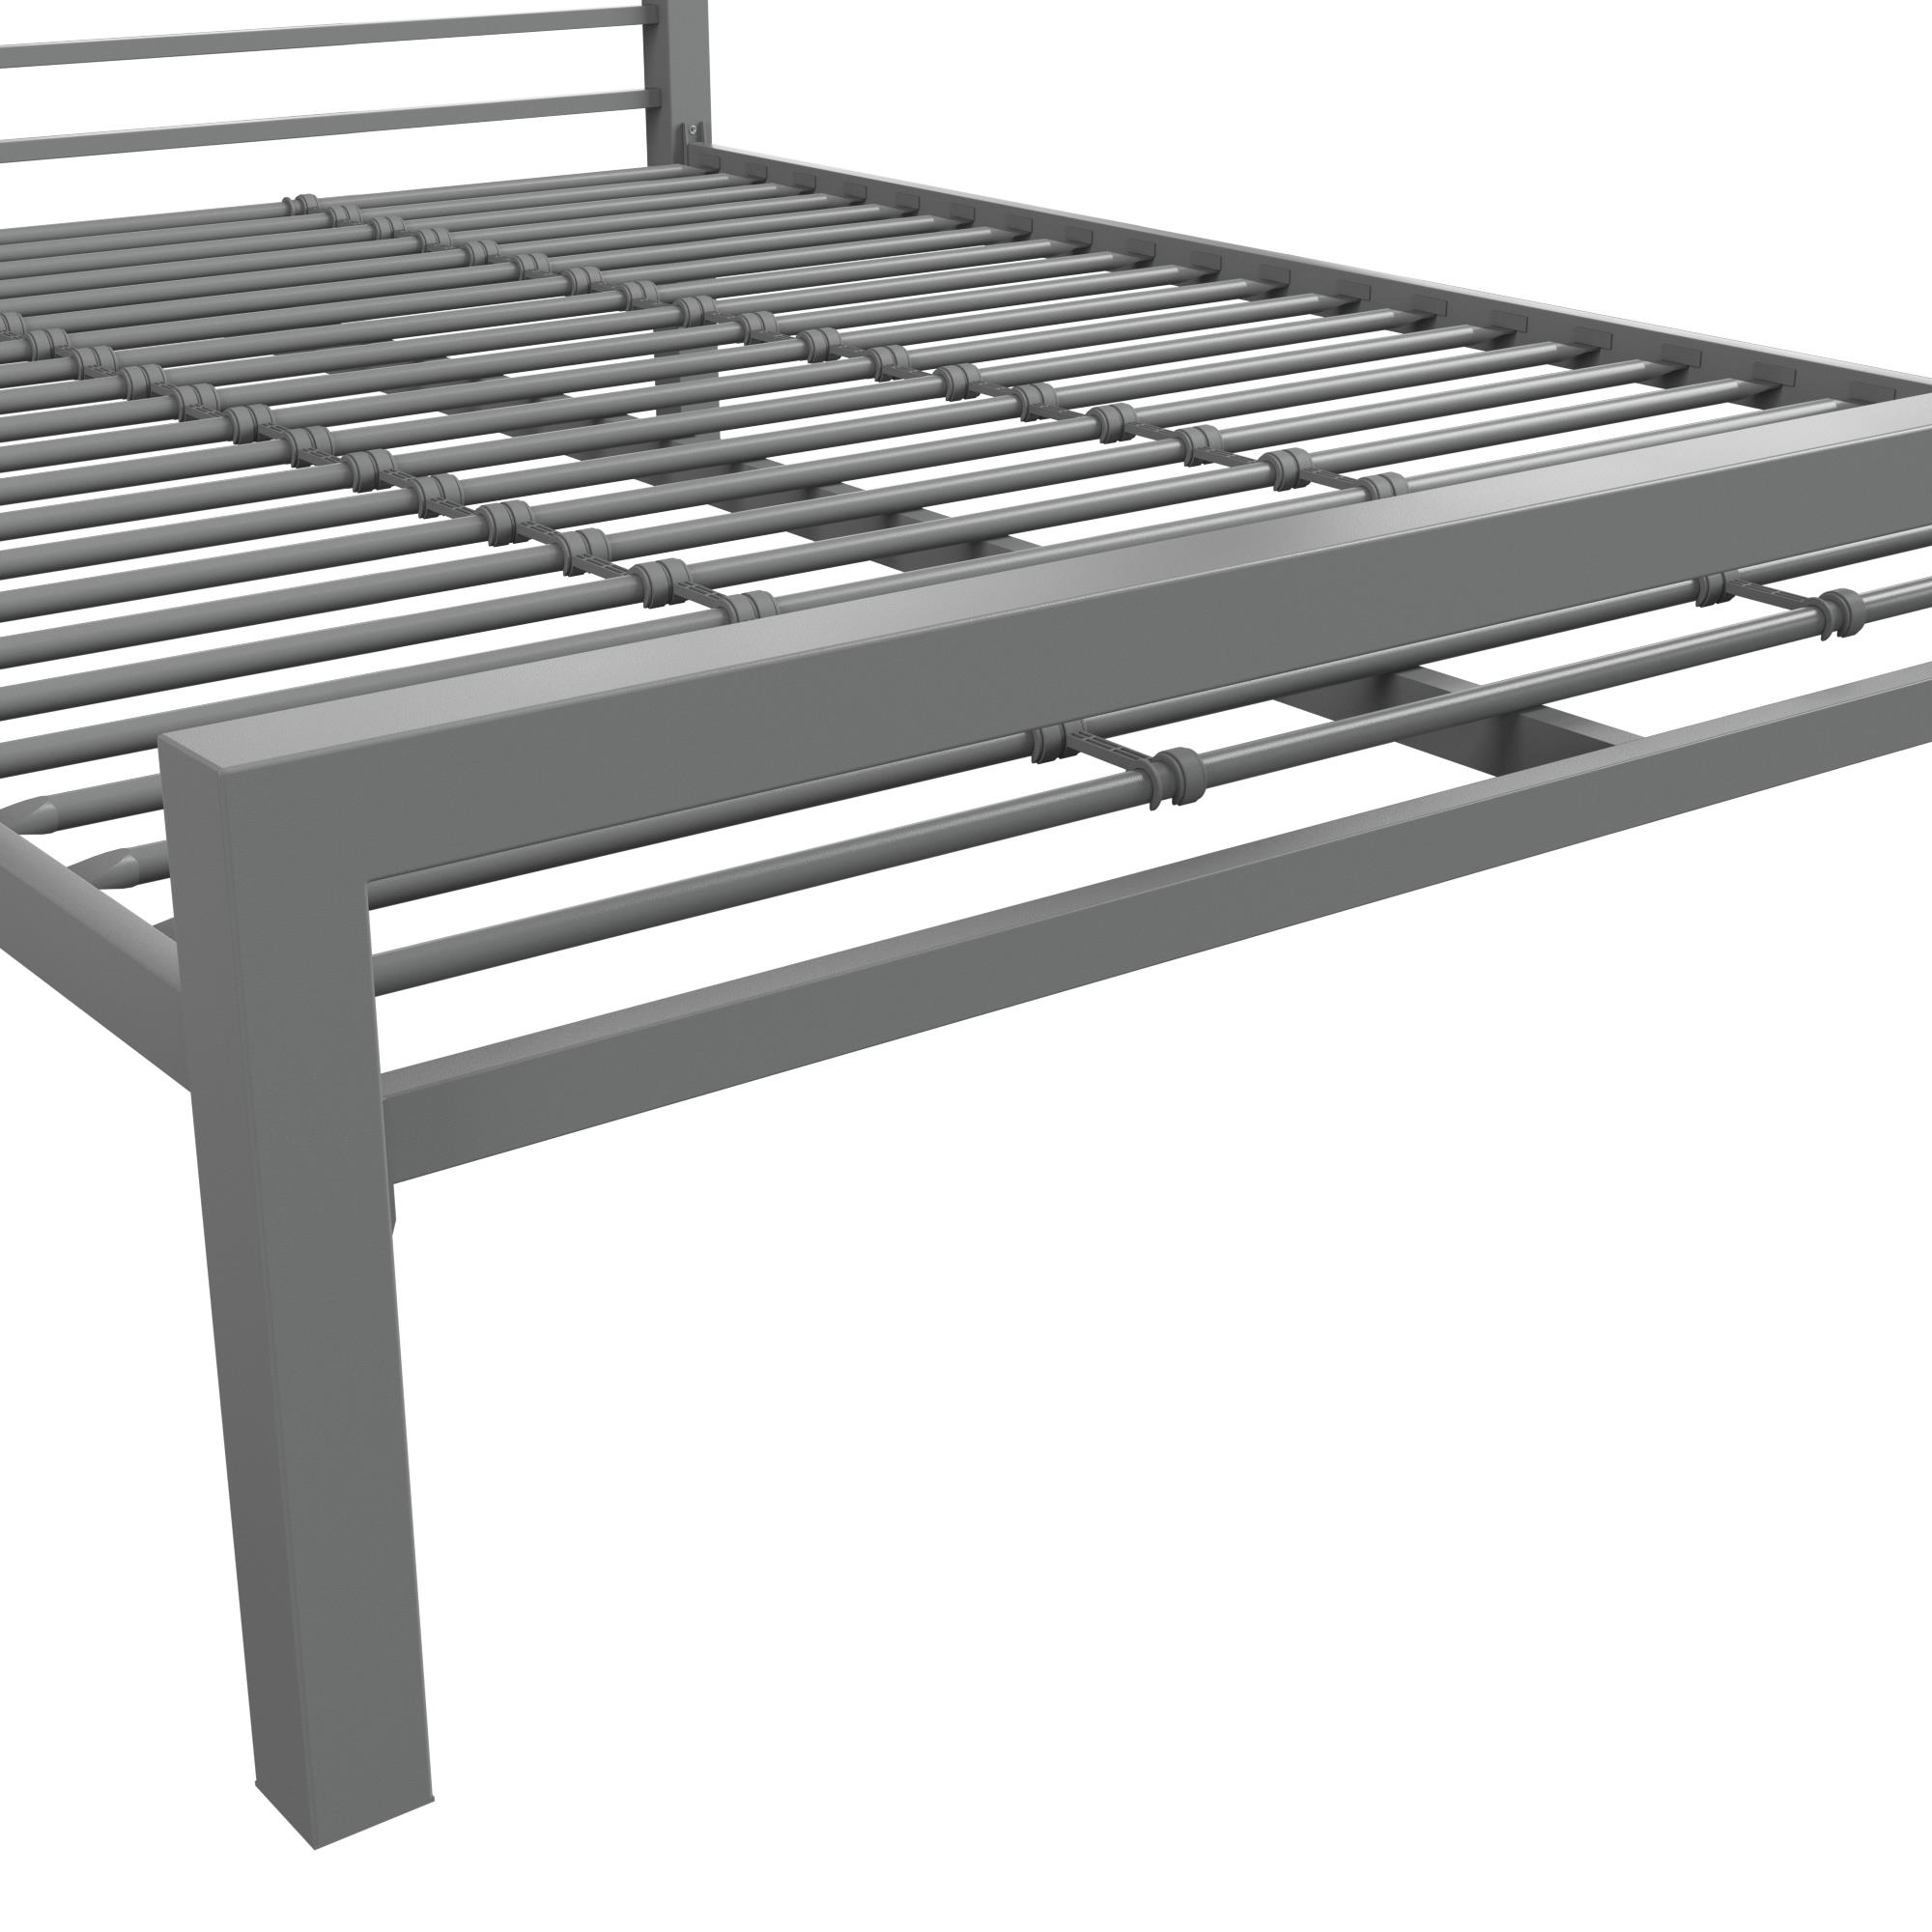 Your Zone Full Metal Bed, Silver - image 4 of 10